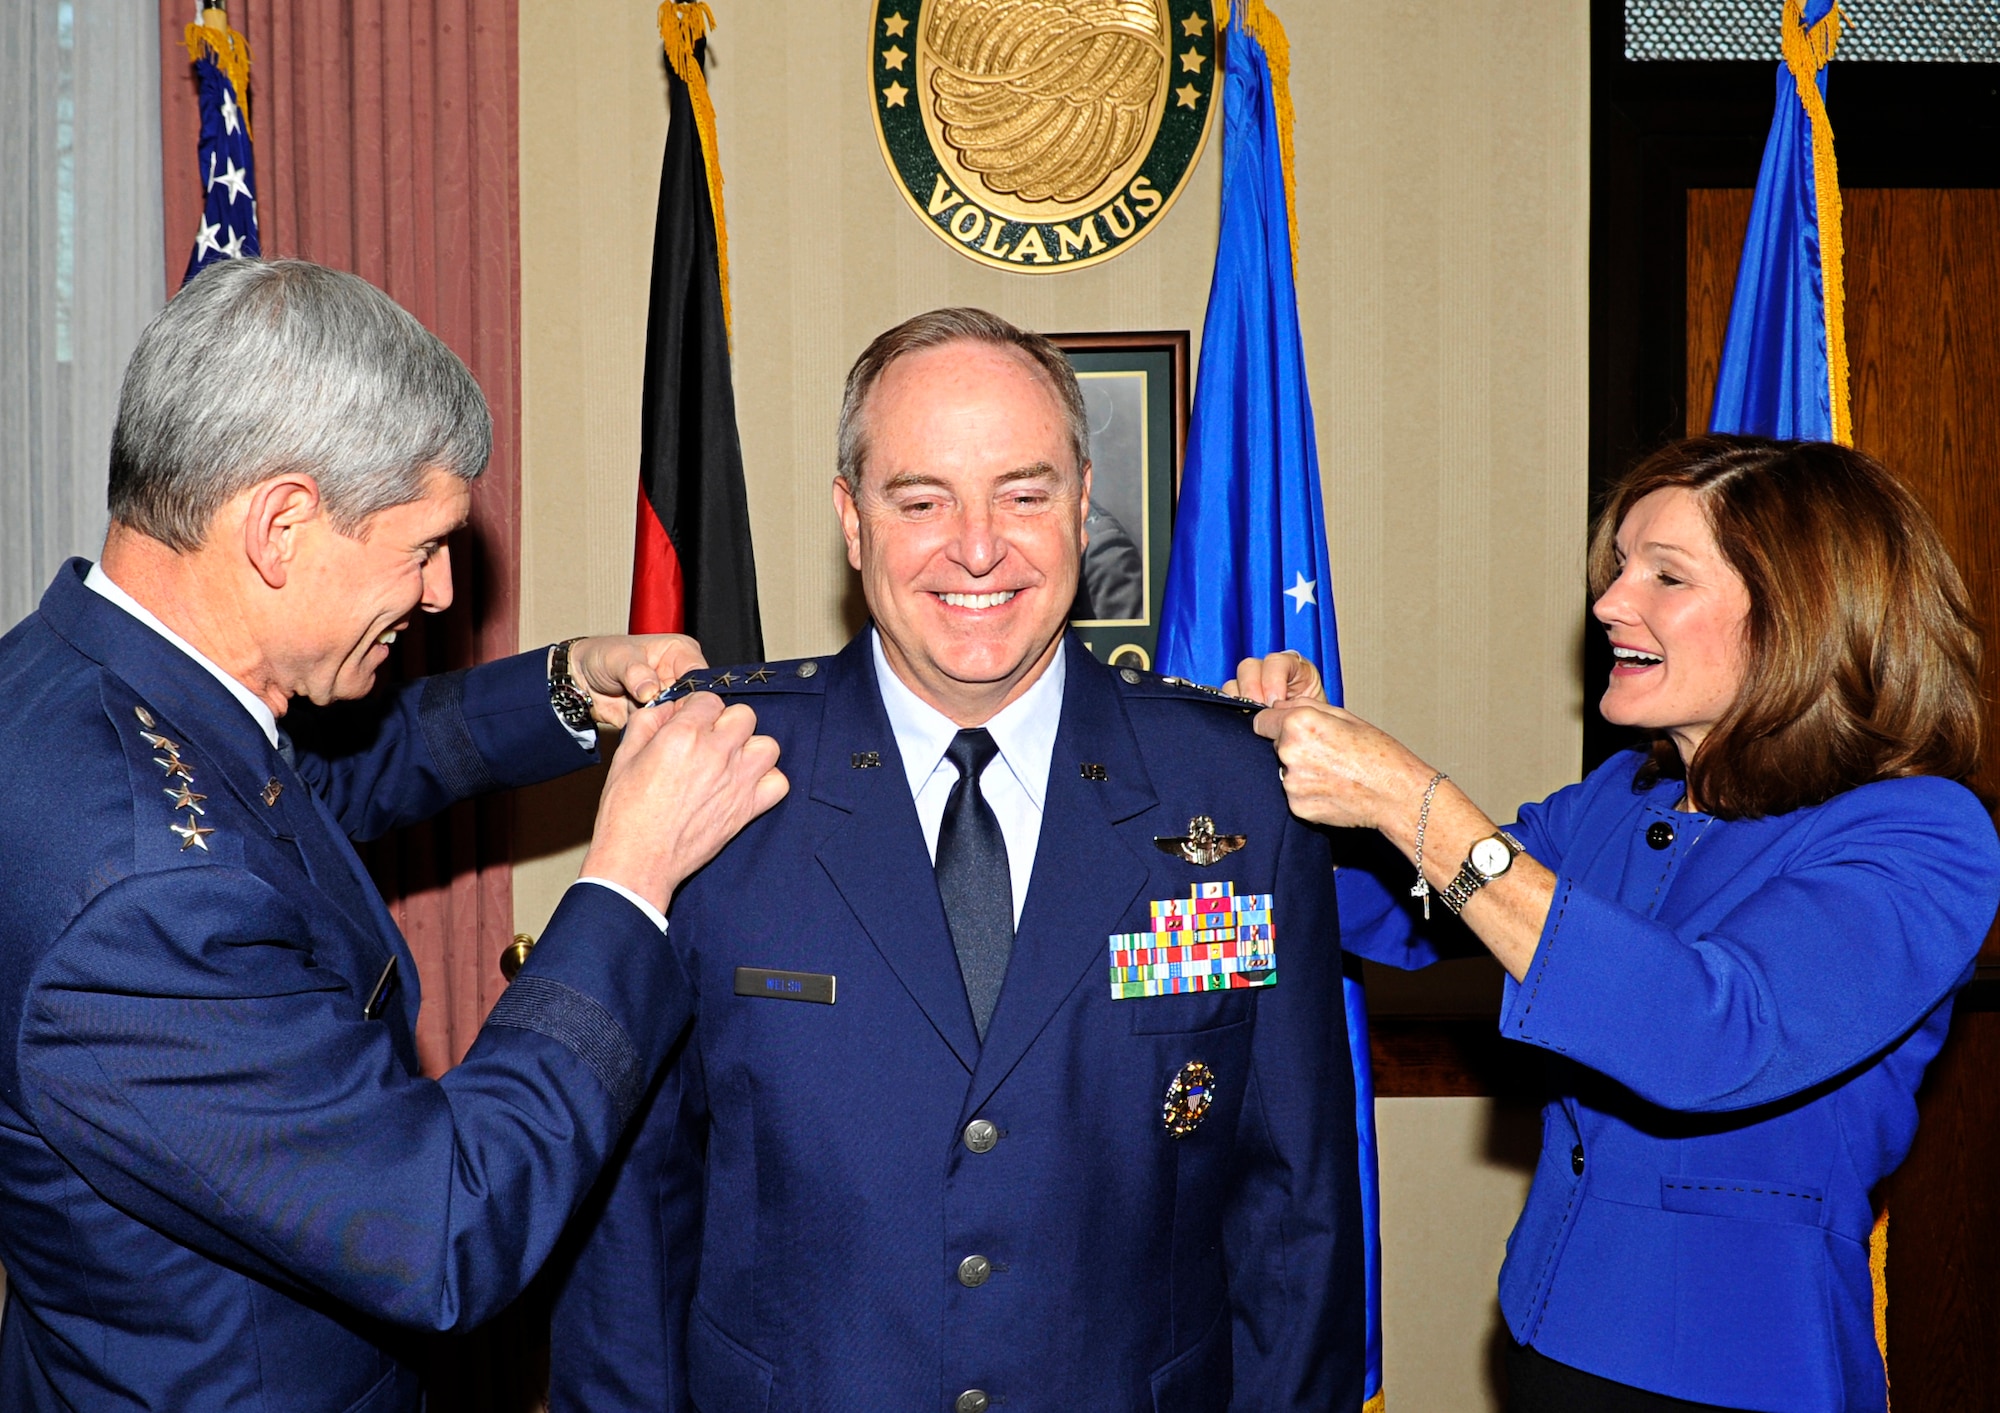 Air Force Chief of Staff Gen. Norton A. Schwartz and Betty Welsh pin on the forth star of Gen. Mark A. Welsh III in a brief ceremony immediately before taking command of U.S. Air Forces in Europe, Ramstein Air Base, Germany, Dec. 13, 2010. Gen. Welsh is responsible for Air Force activities, conducted through 3rd Air Force, in an area of operations covering almost one-fifth of the globe. (U.S. Air Force photo by Airman 1st Class Desiree Whitney Esposito)